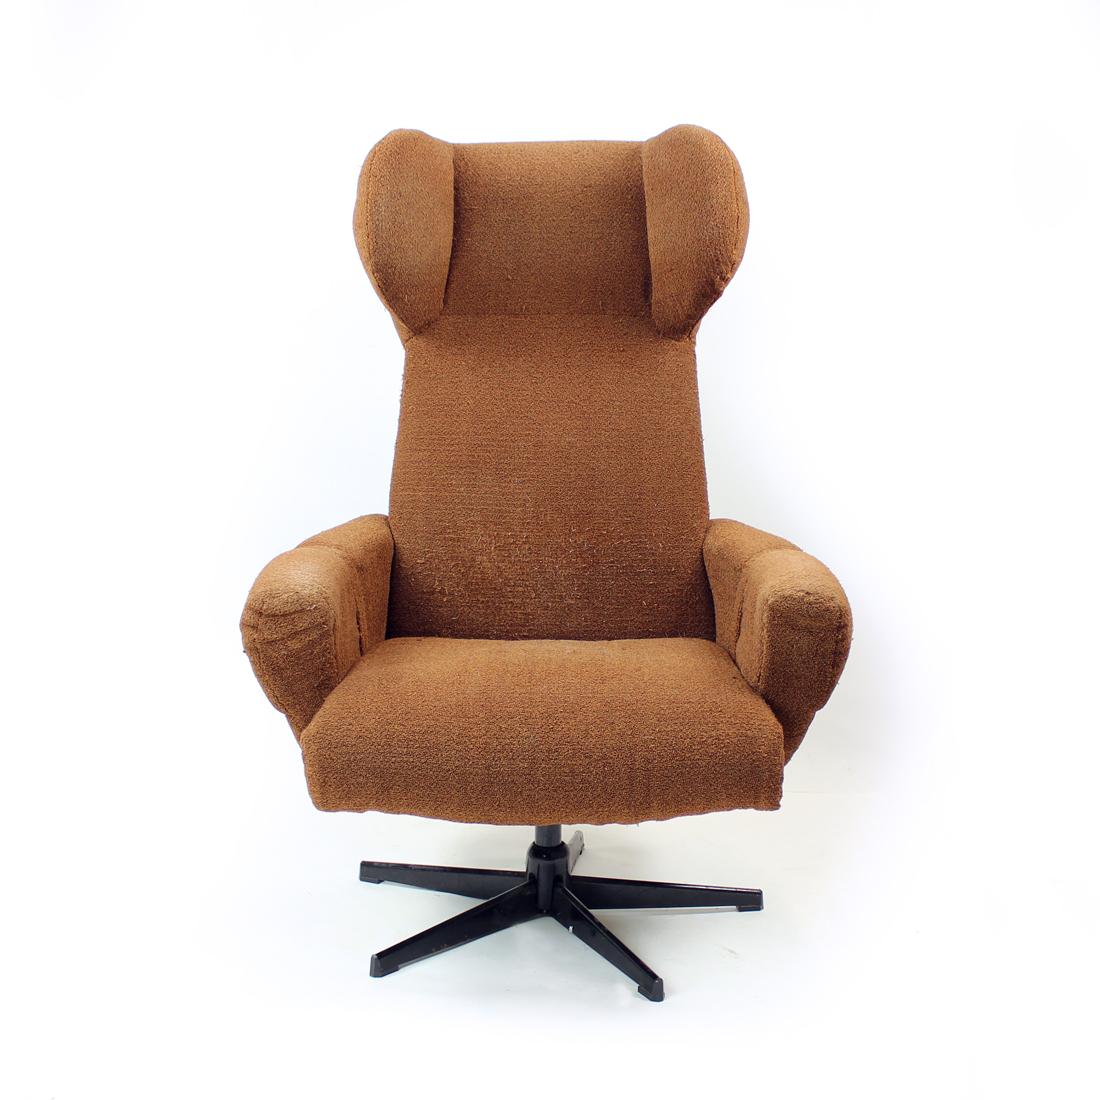 Beautiful wing chair produced in Czechoslovakia in 1960s. Amazing, elegant design and functionality make this chair a stand out in any interiors. The chair swivels on a strong metal leg and has a black metal base. Can be used as it is, however, the